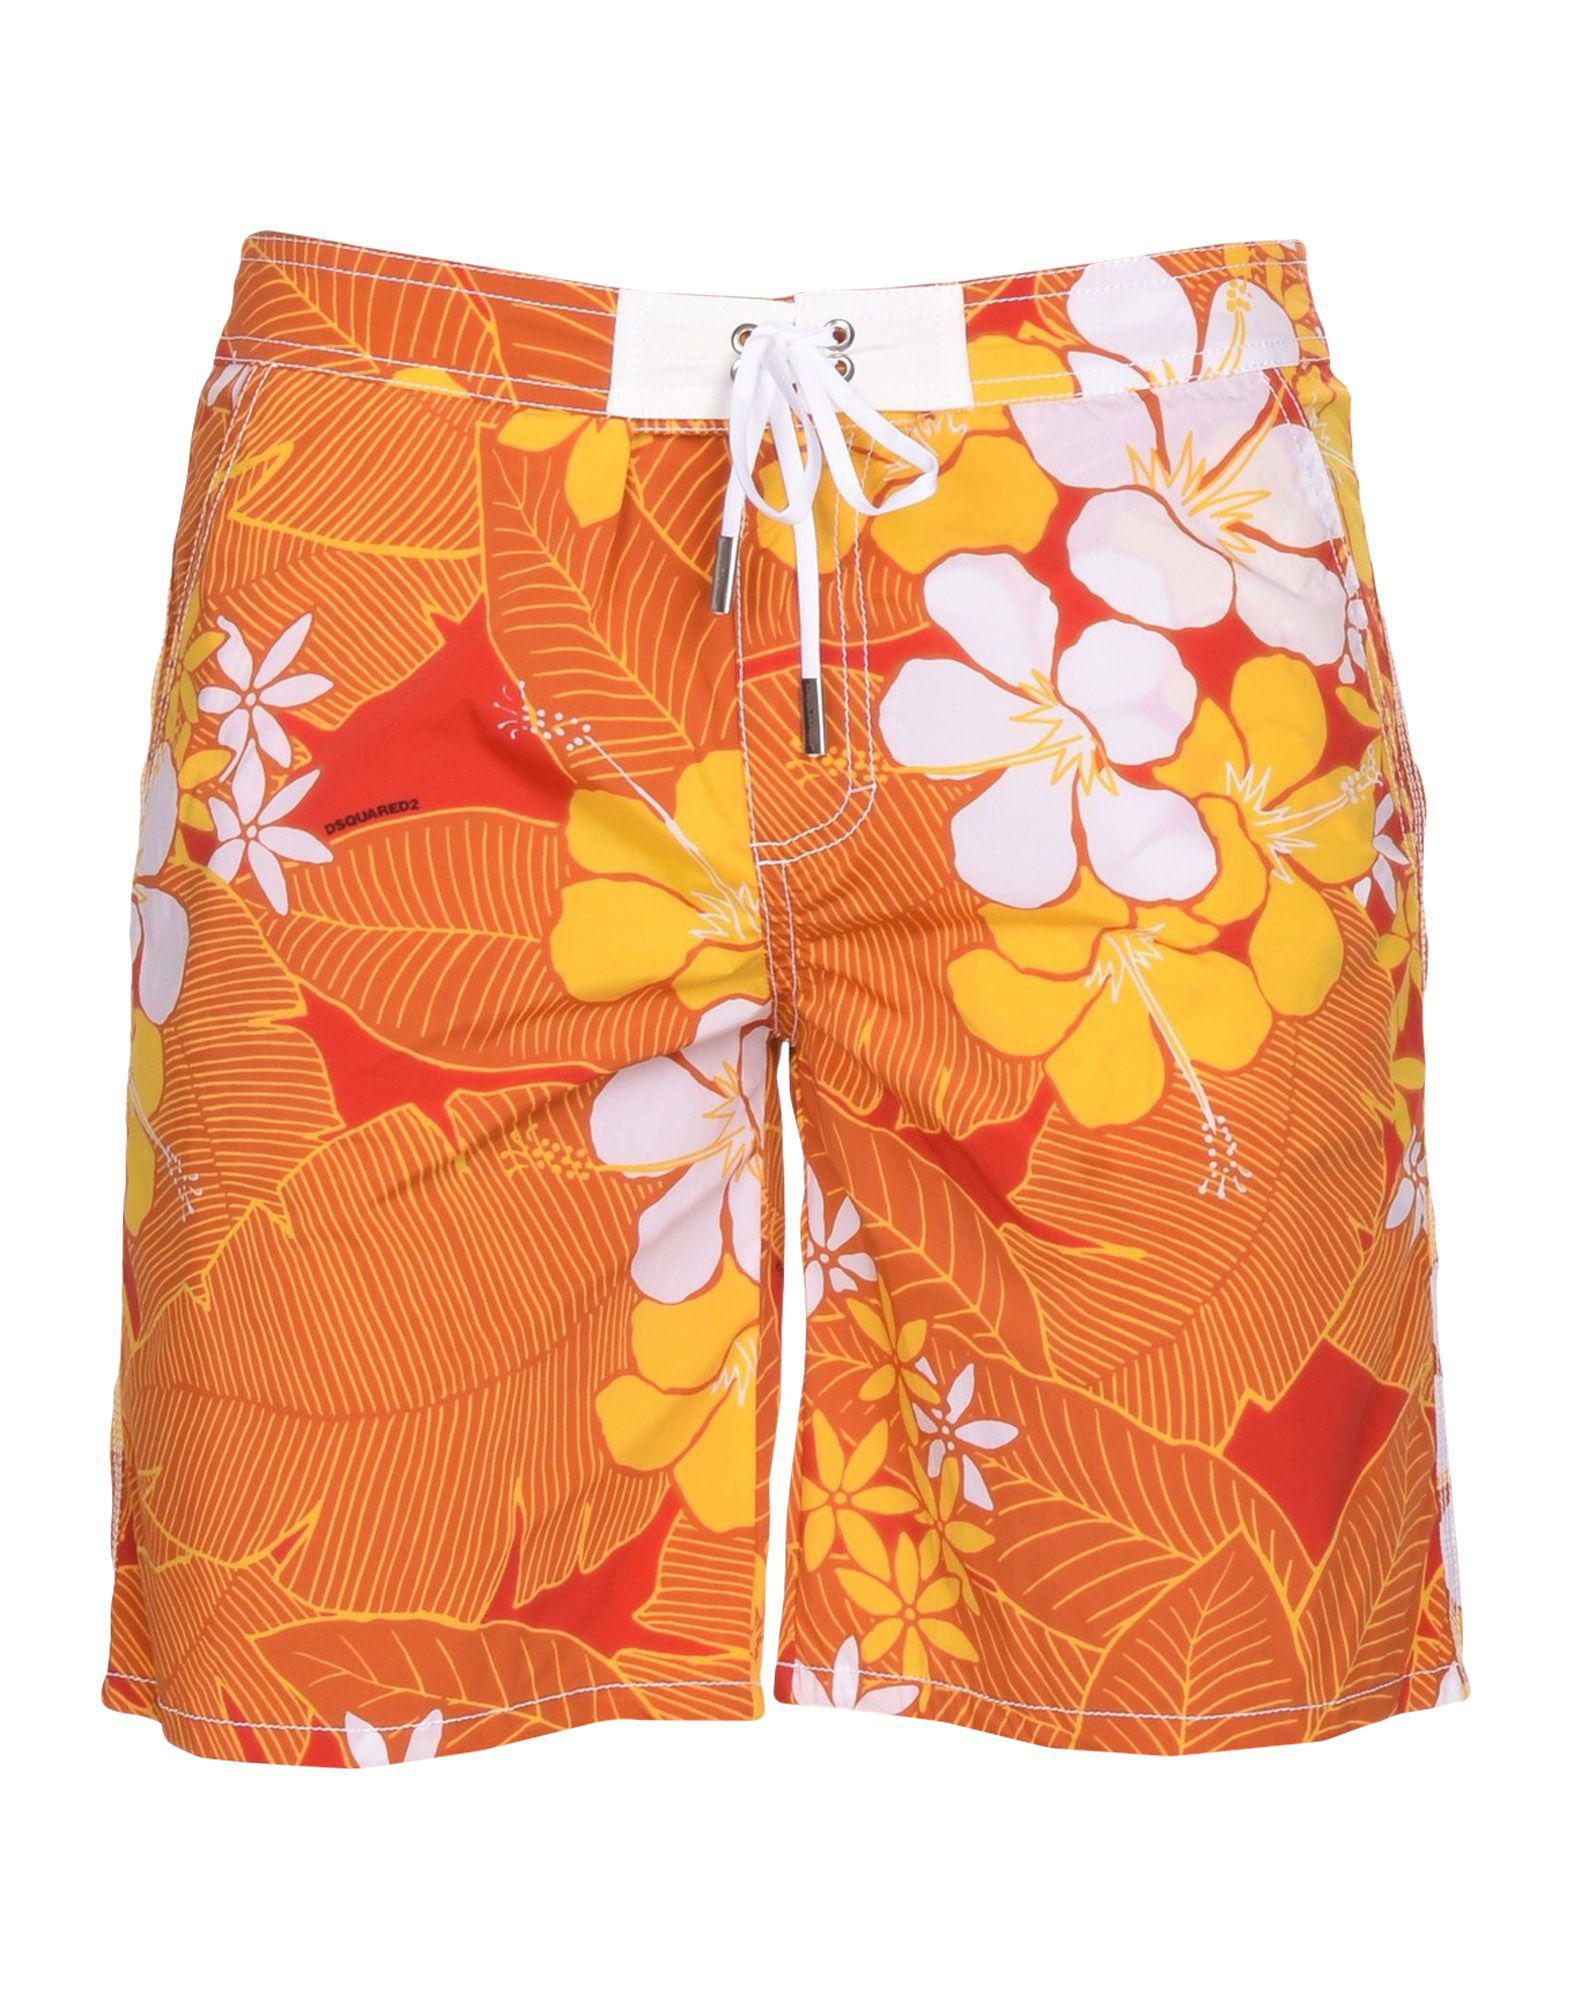 DSquared² Synthetic Swimming Trunks in Orange for Men - Lyst